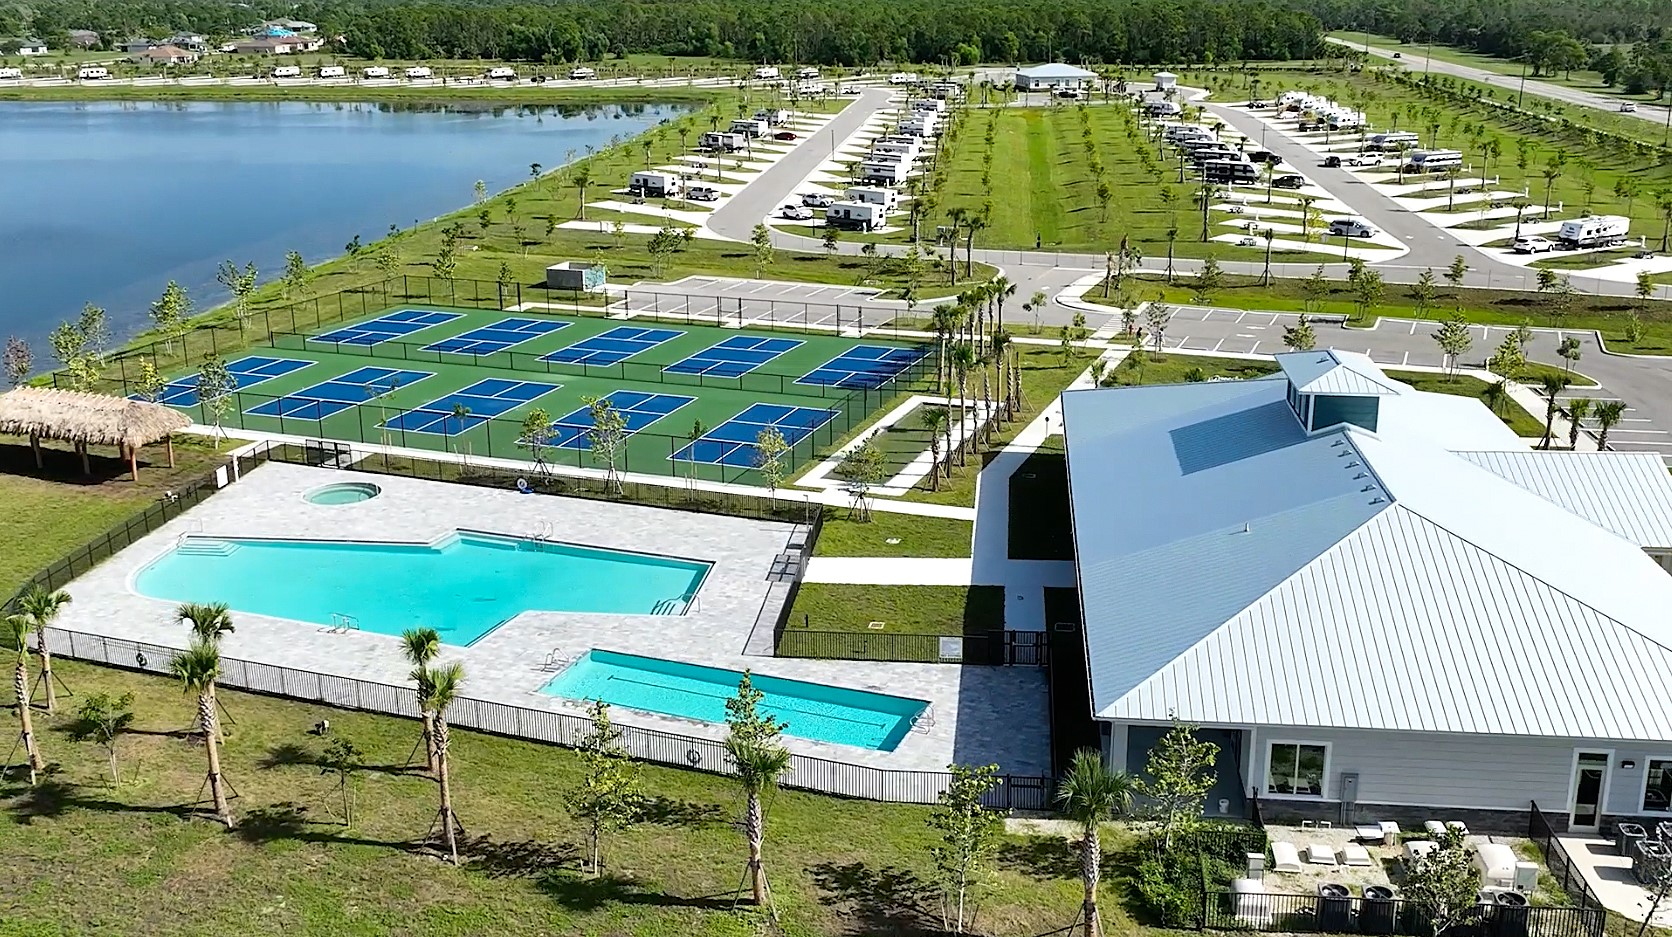 Aerial shot of RV sites, pickleball courts and pools